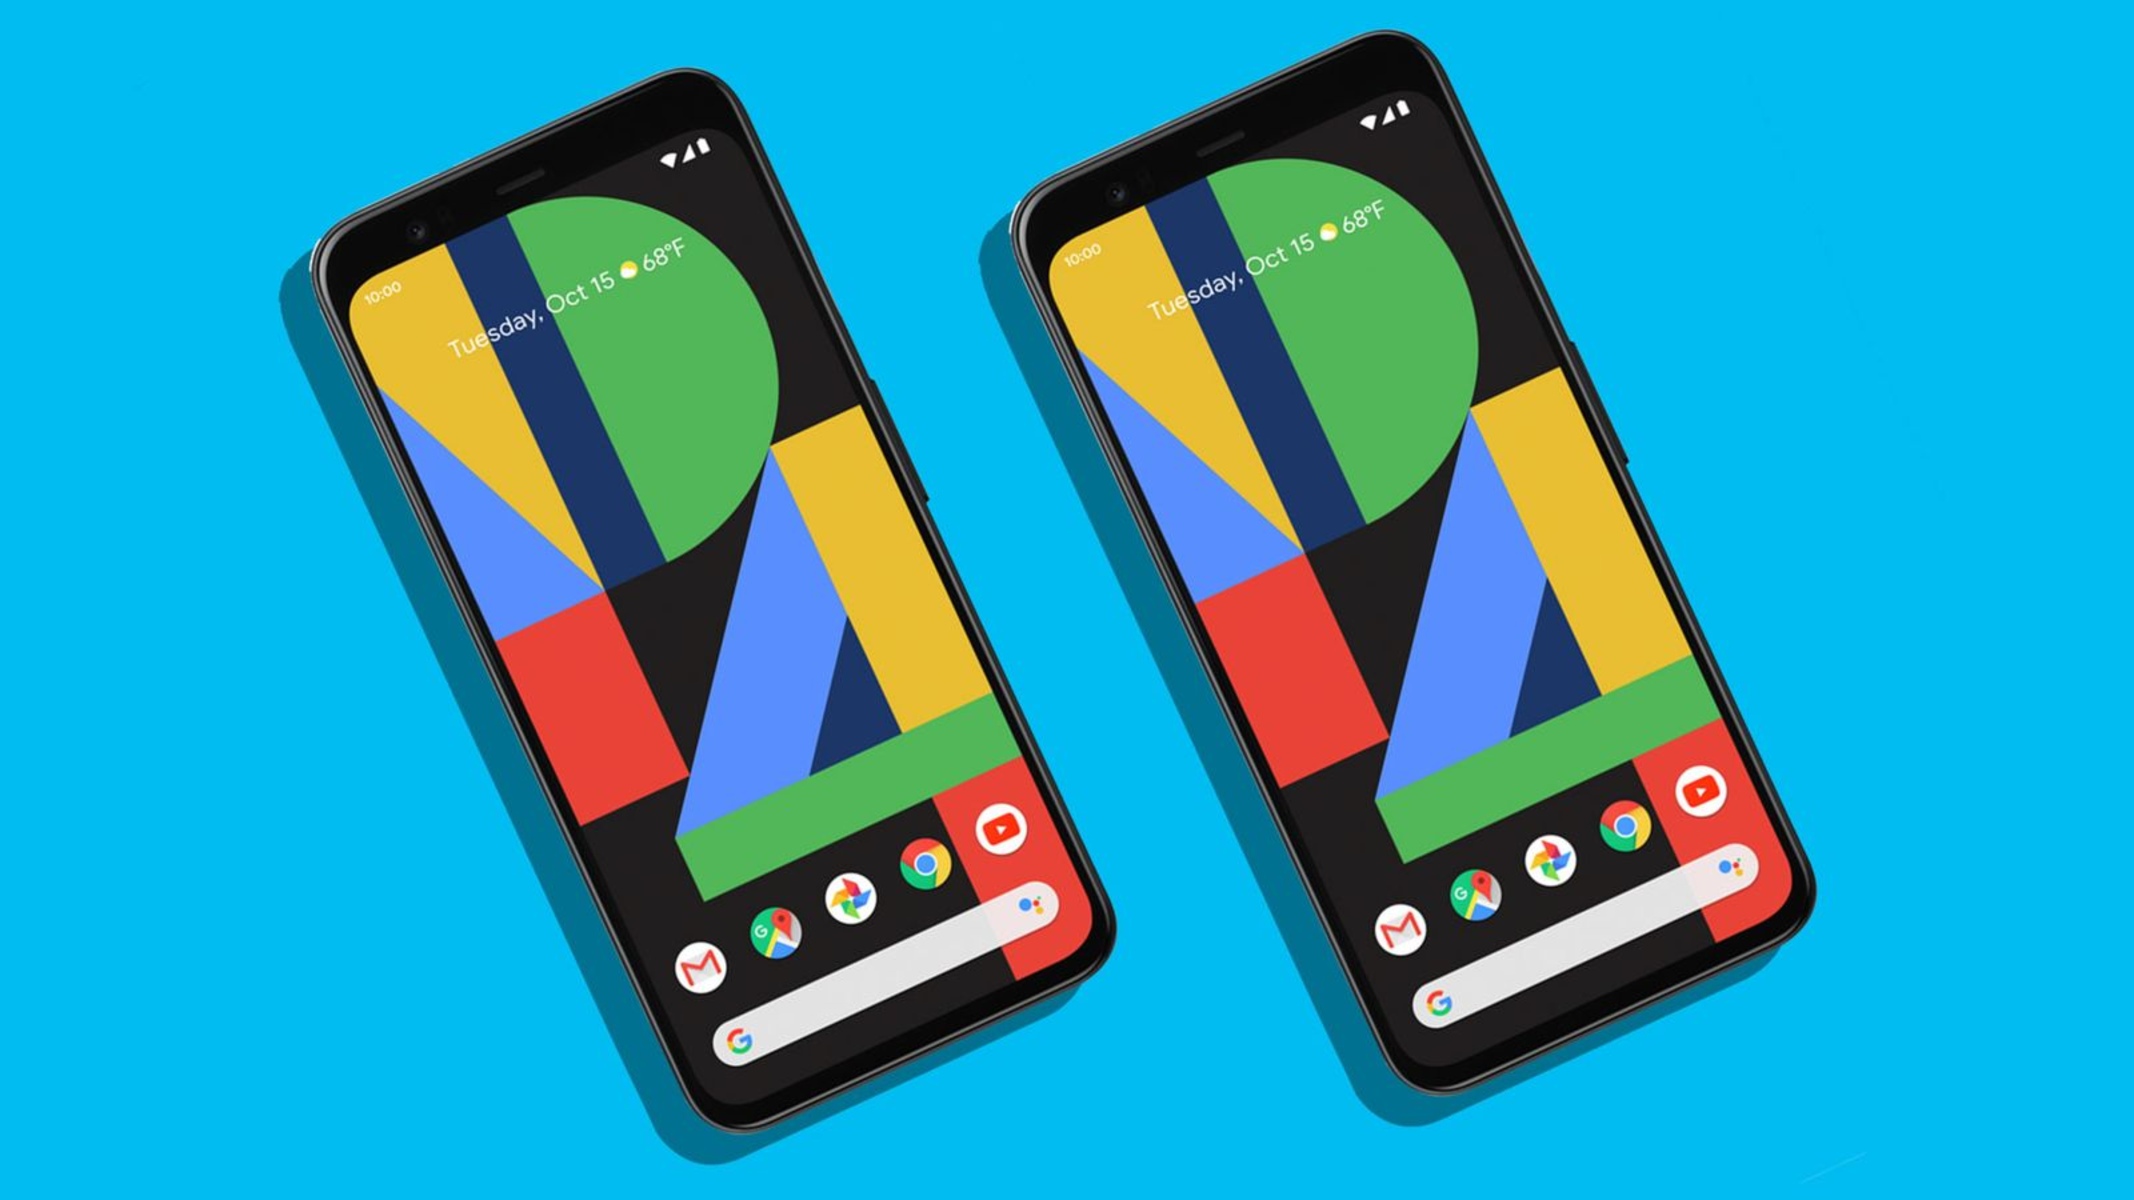 Pixel 4 Shopping Guide: Where To Purchase